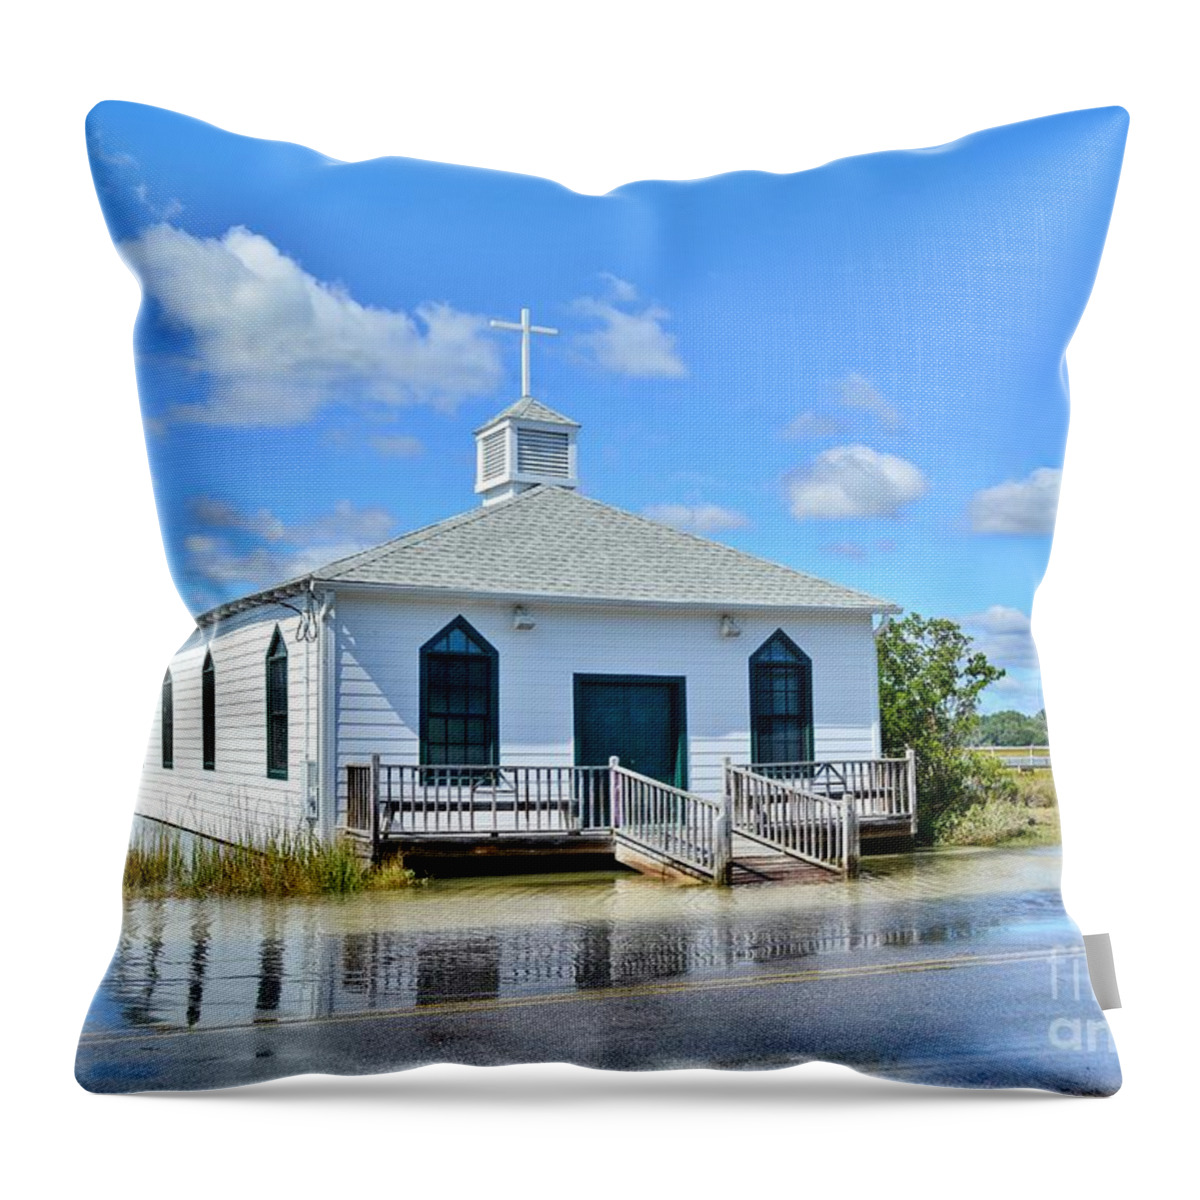 Historic Throw Pillow featuring the photograph High Tide At Pawleys Island Church by Kathy Baccari